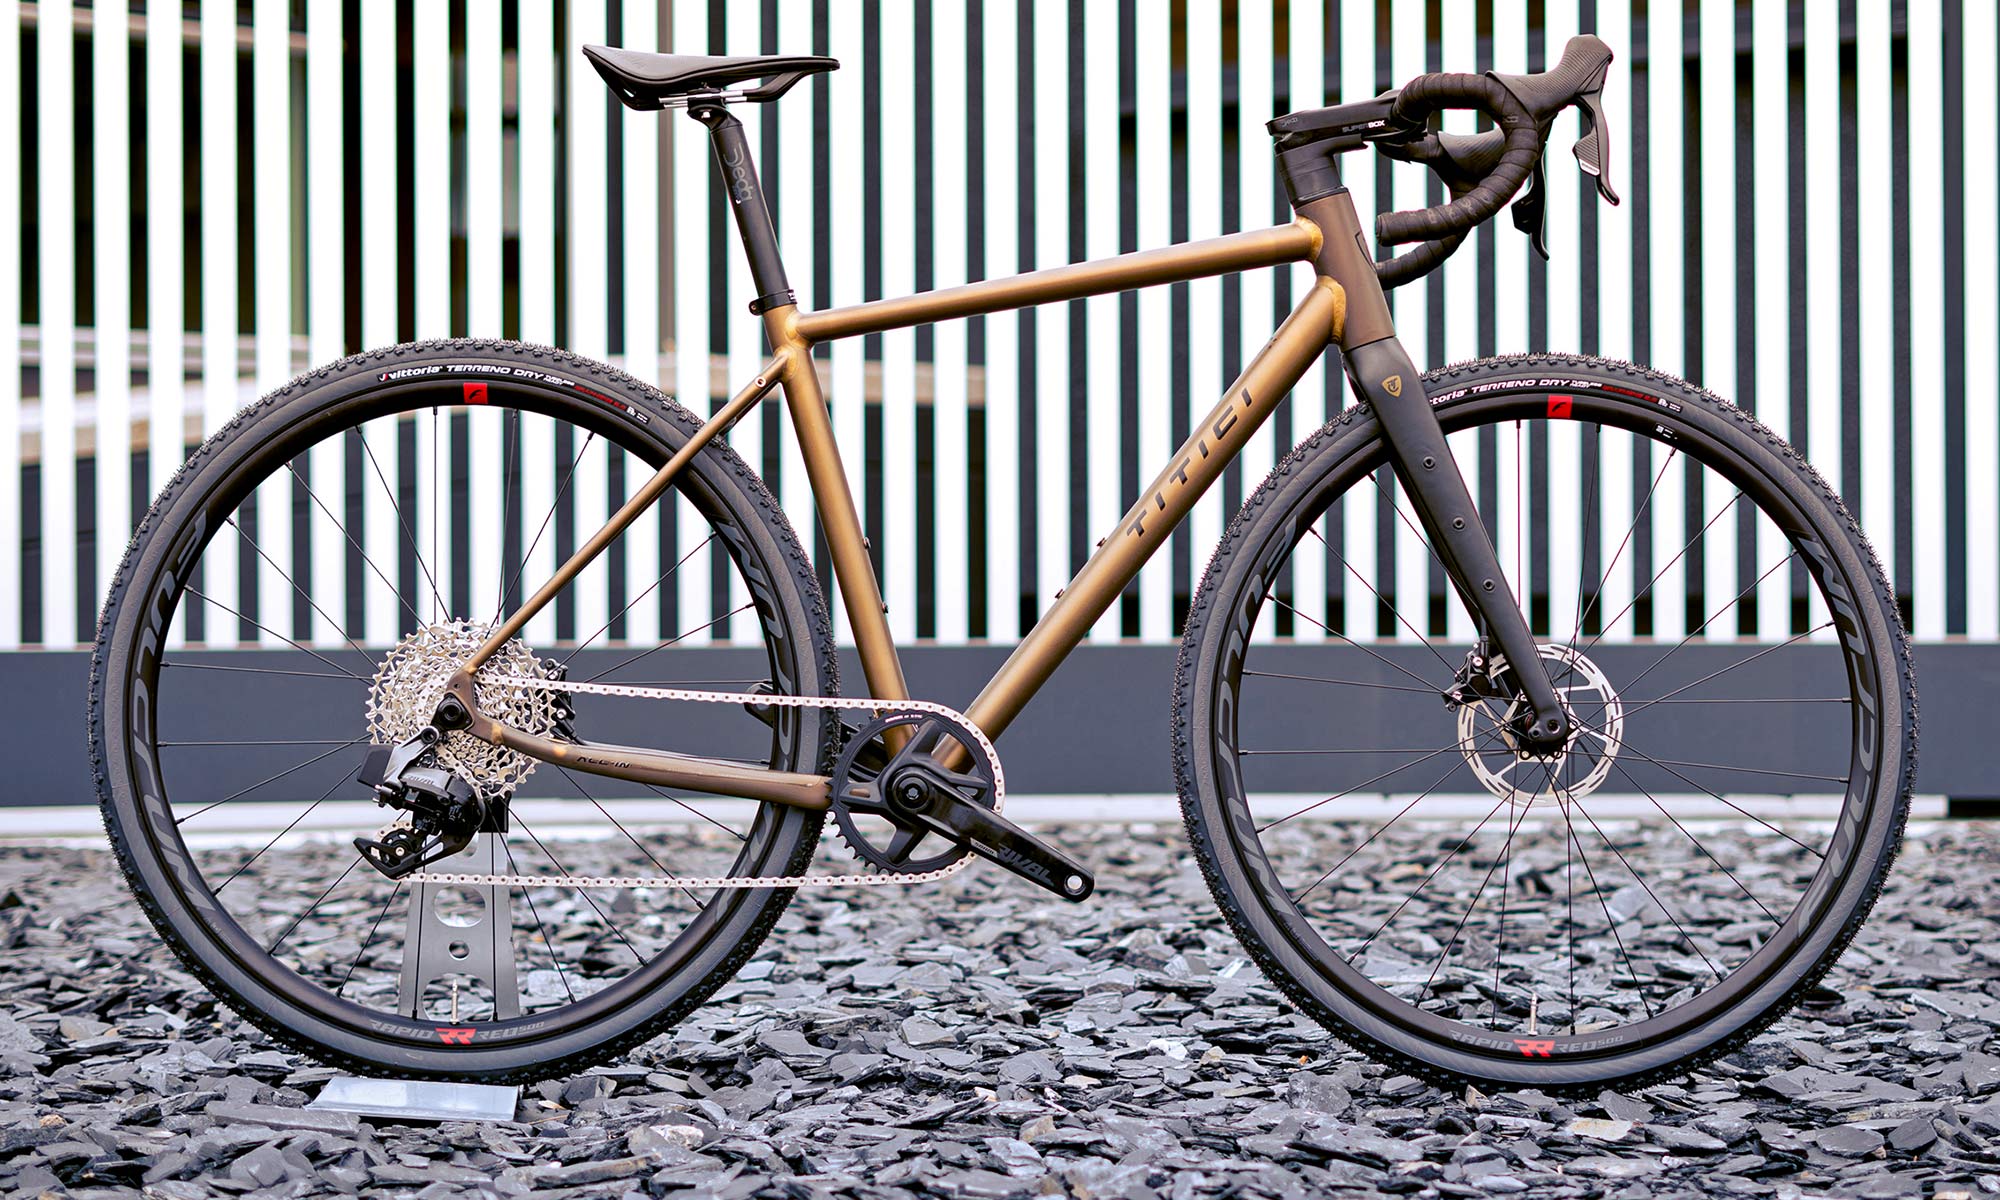 Titici All-In AND durable alloy gravel with GHA Silver hard anodizing, photo by Mattia Ragni, complete bike